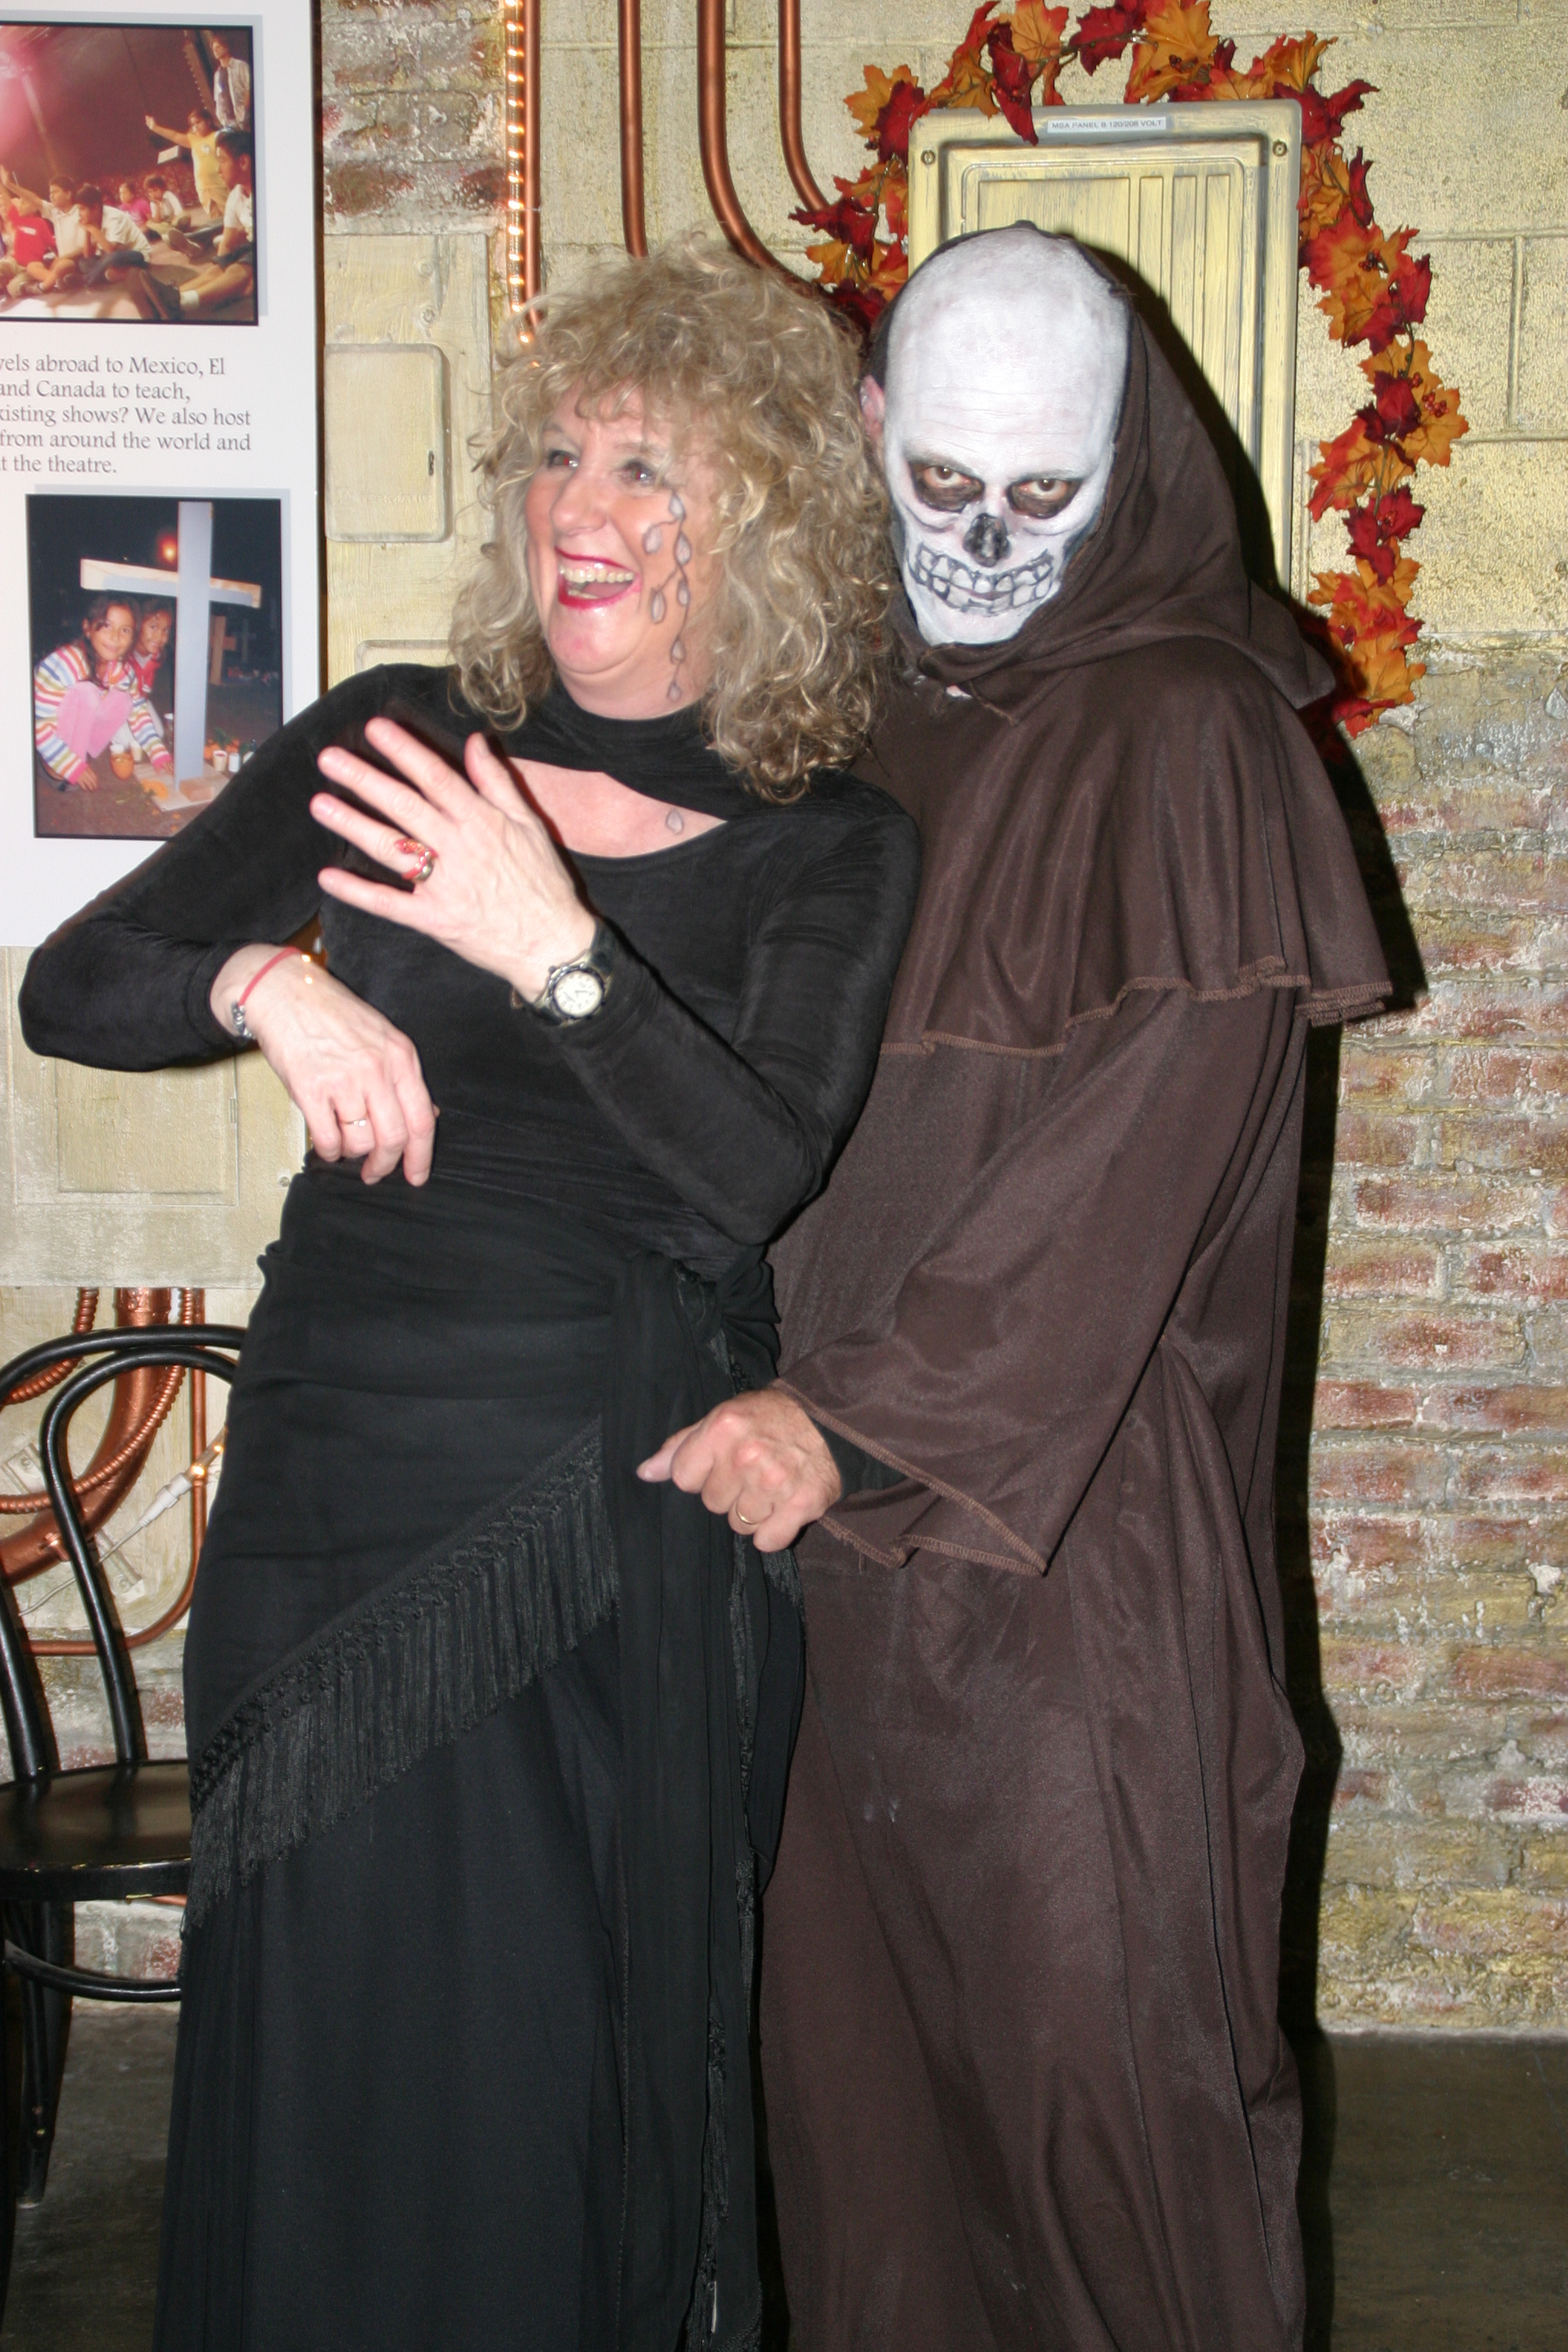 Debby at the 24th Street Theater Halloween 2010 Love you Debby and Jay